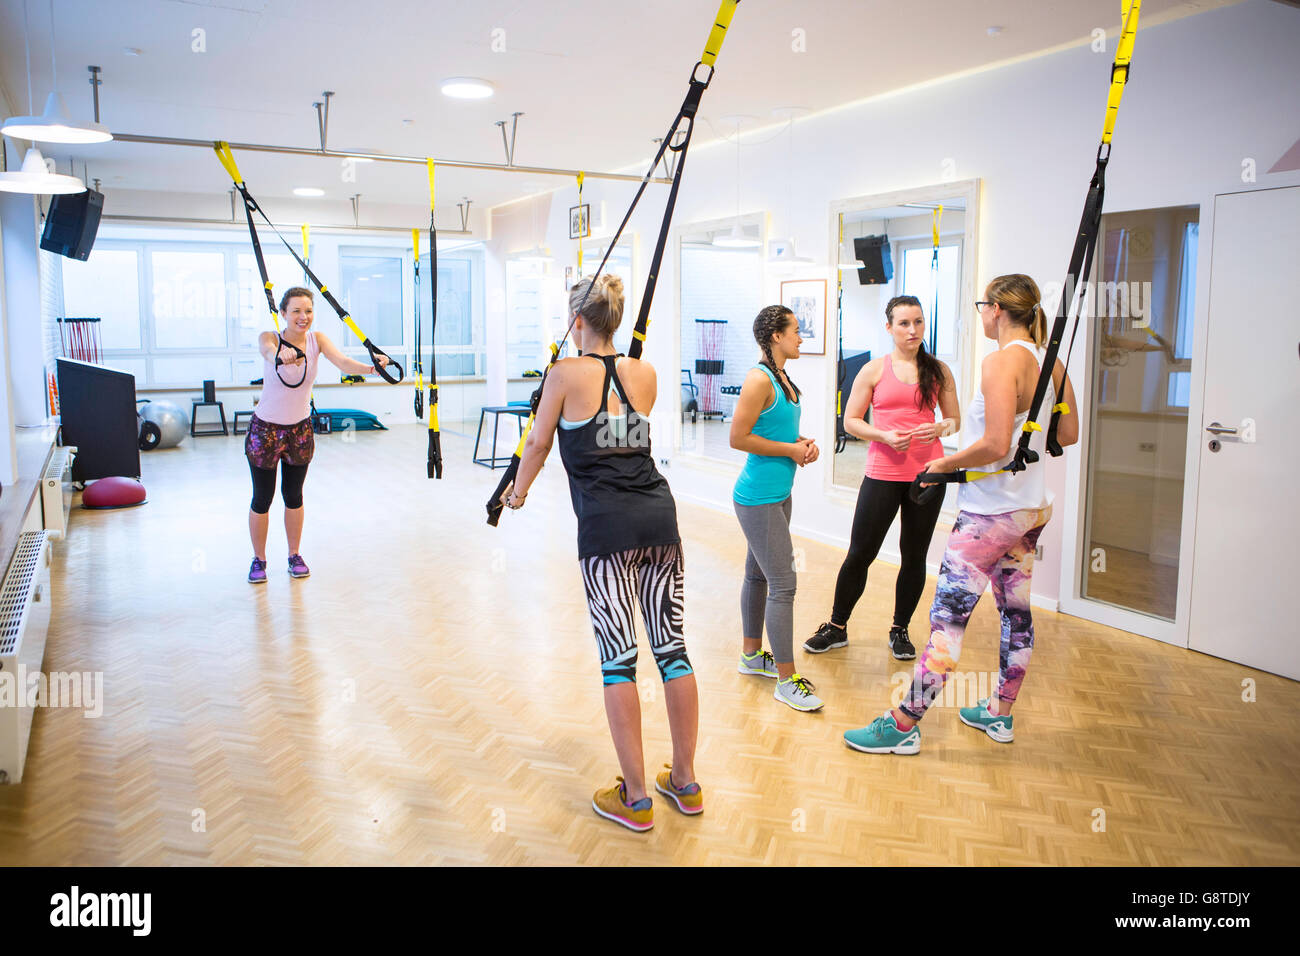 Women in exercise class doing suspension training Stock Photo